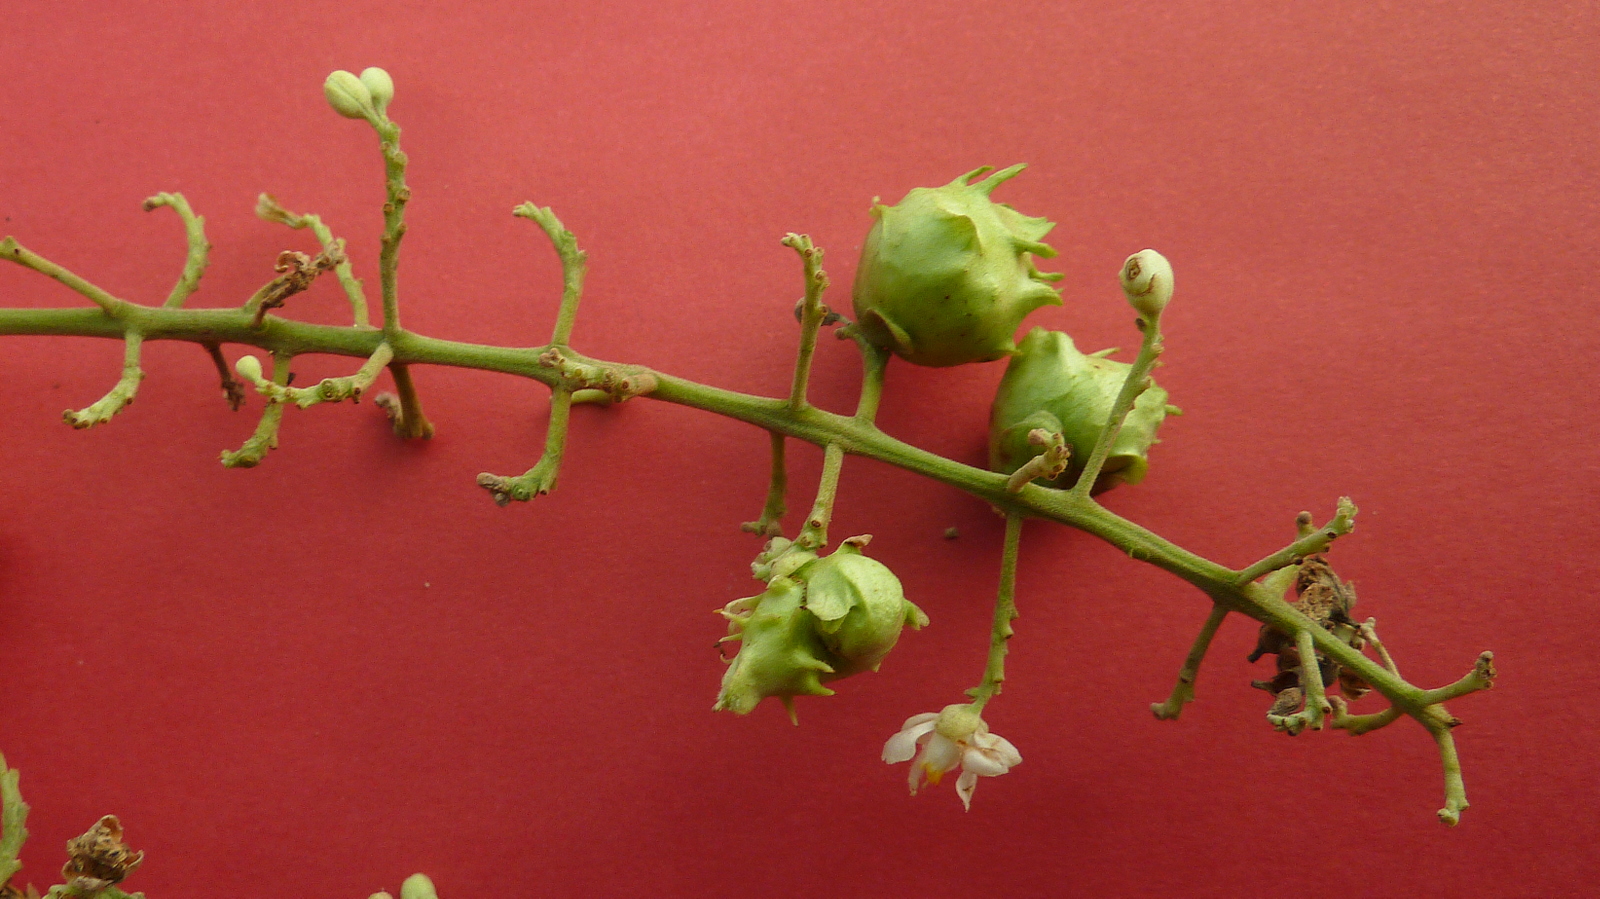 the buds and flowers of an old plant